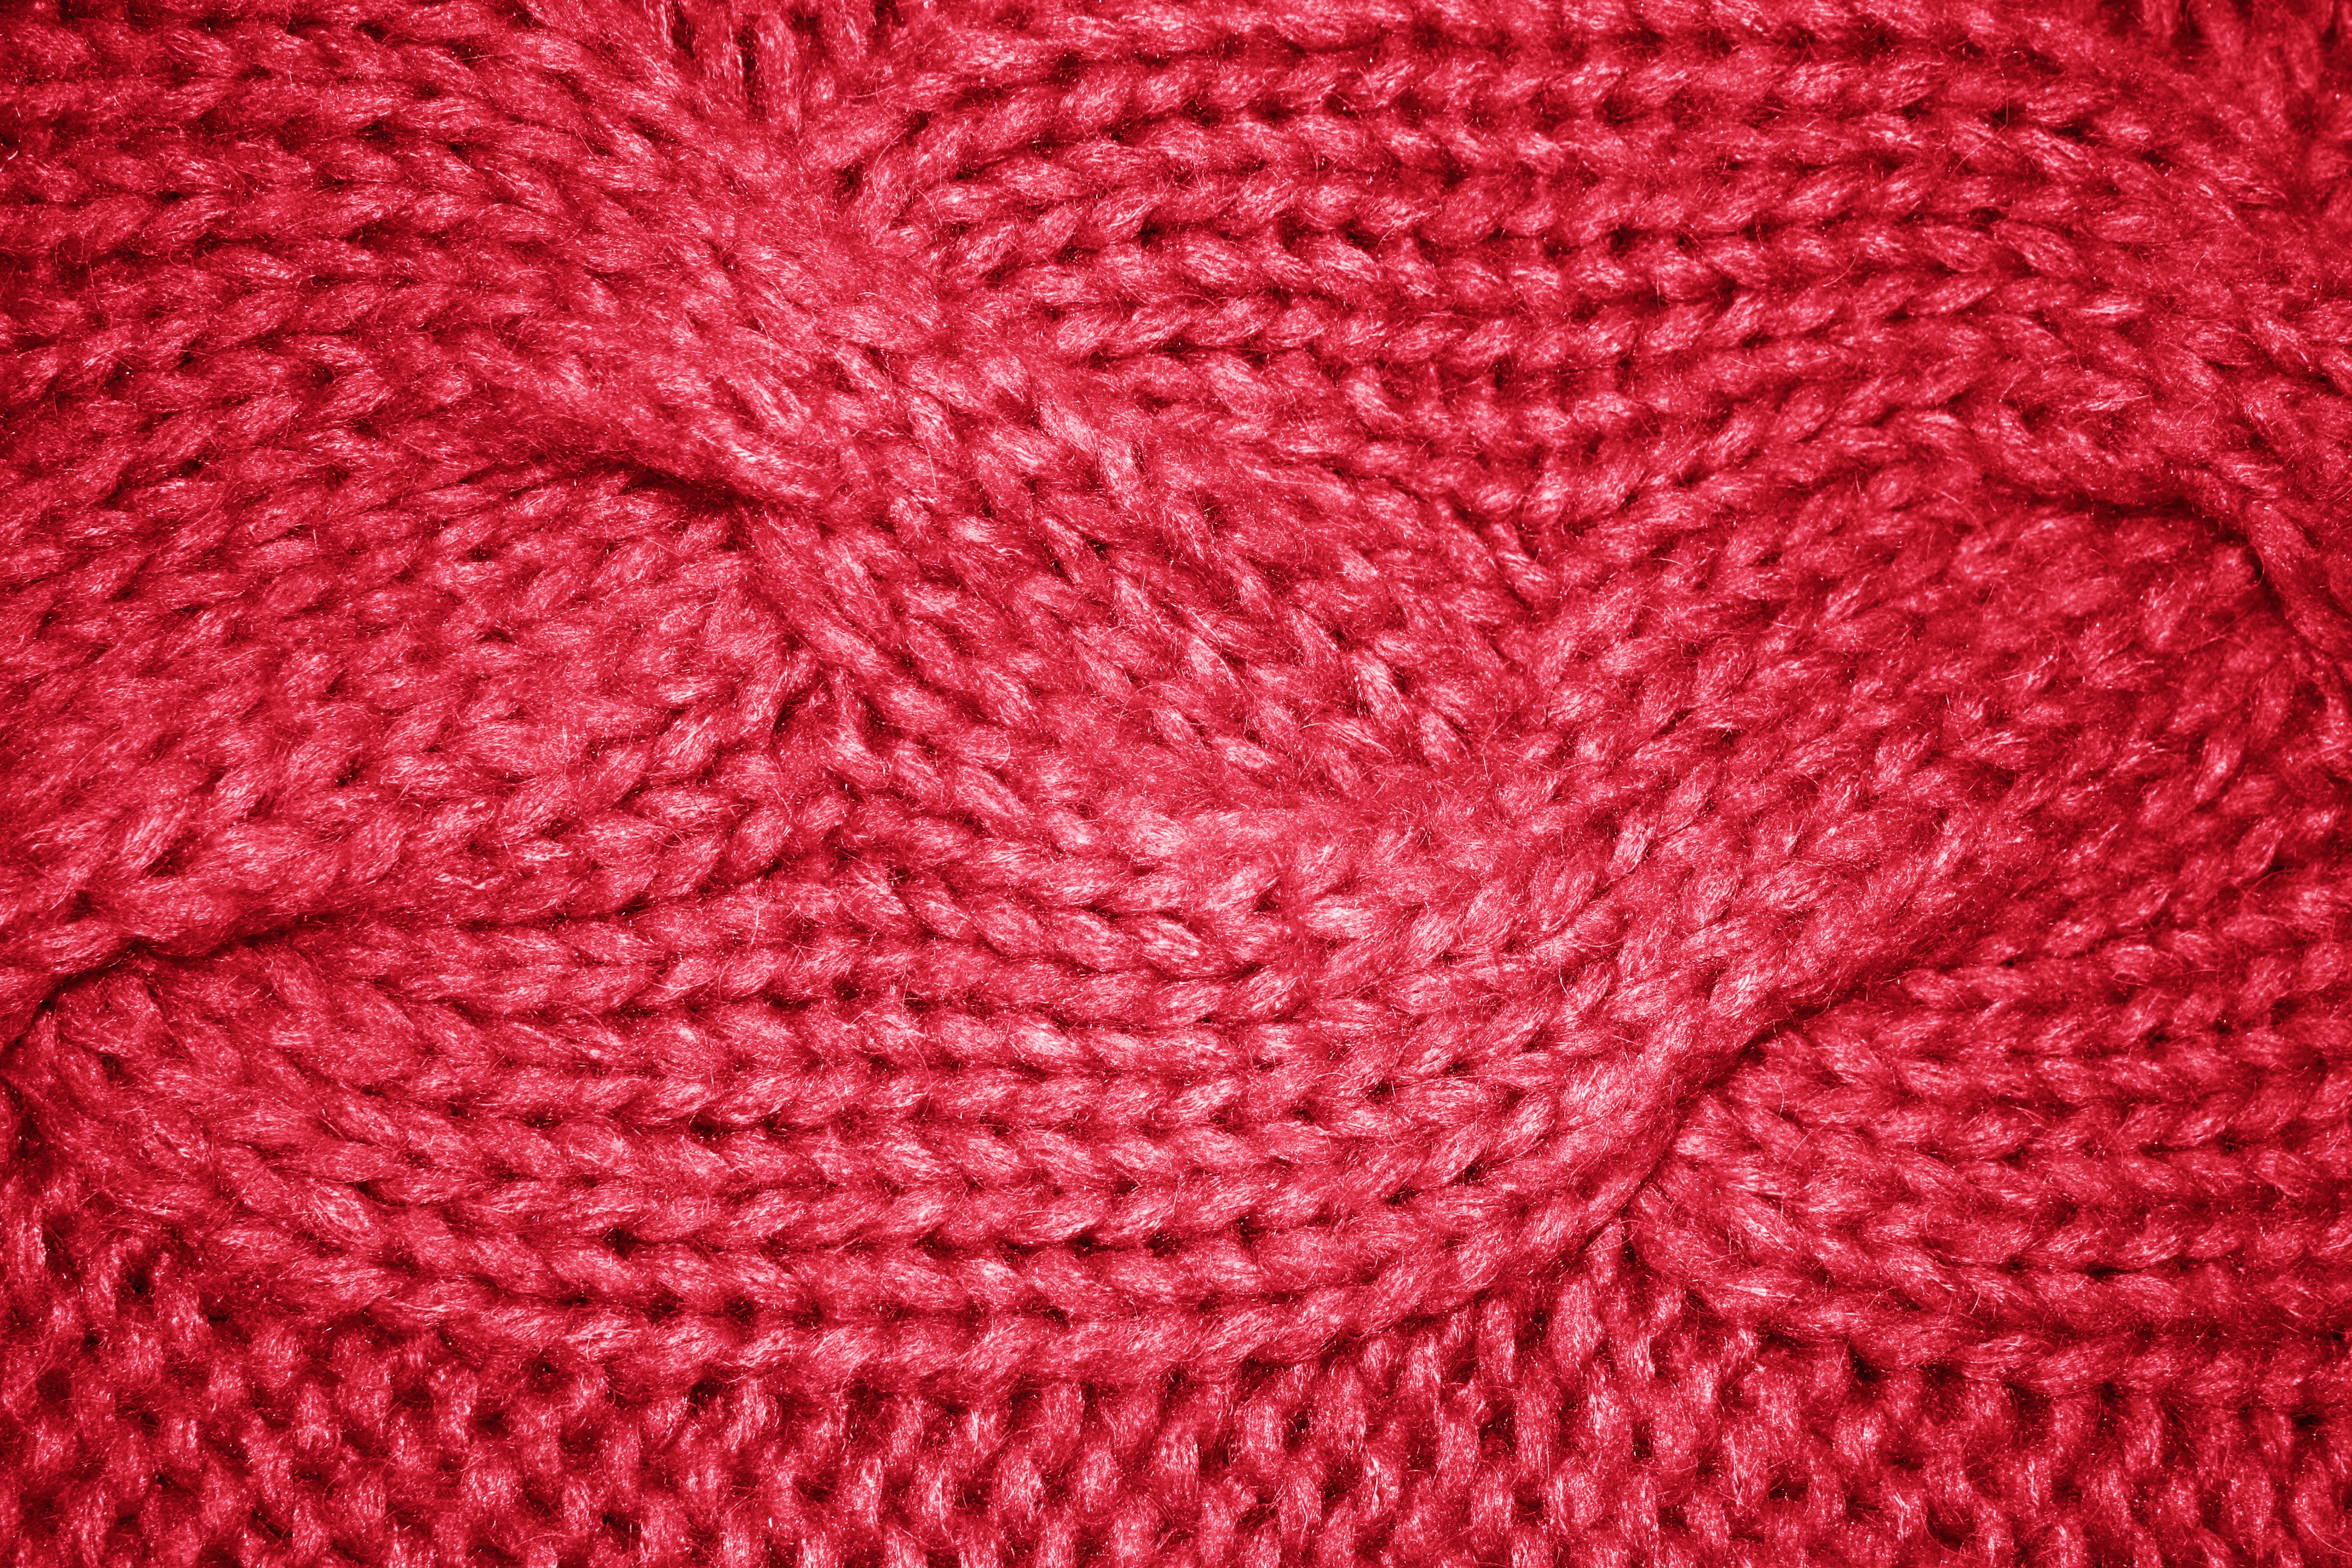 Red Cable Knit Pattern Texture Picture, Free Photograph